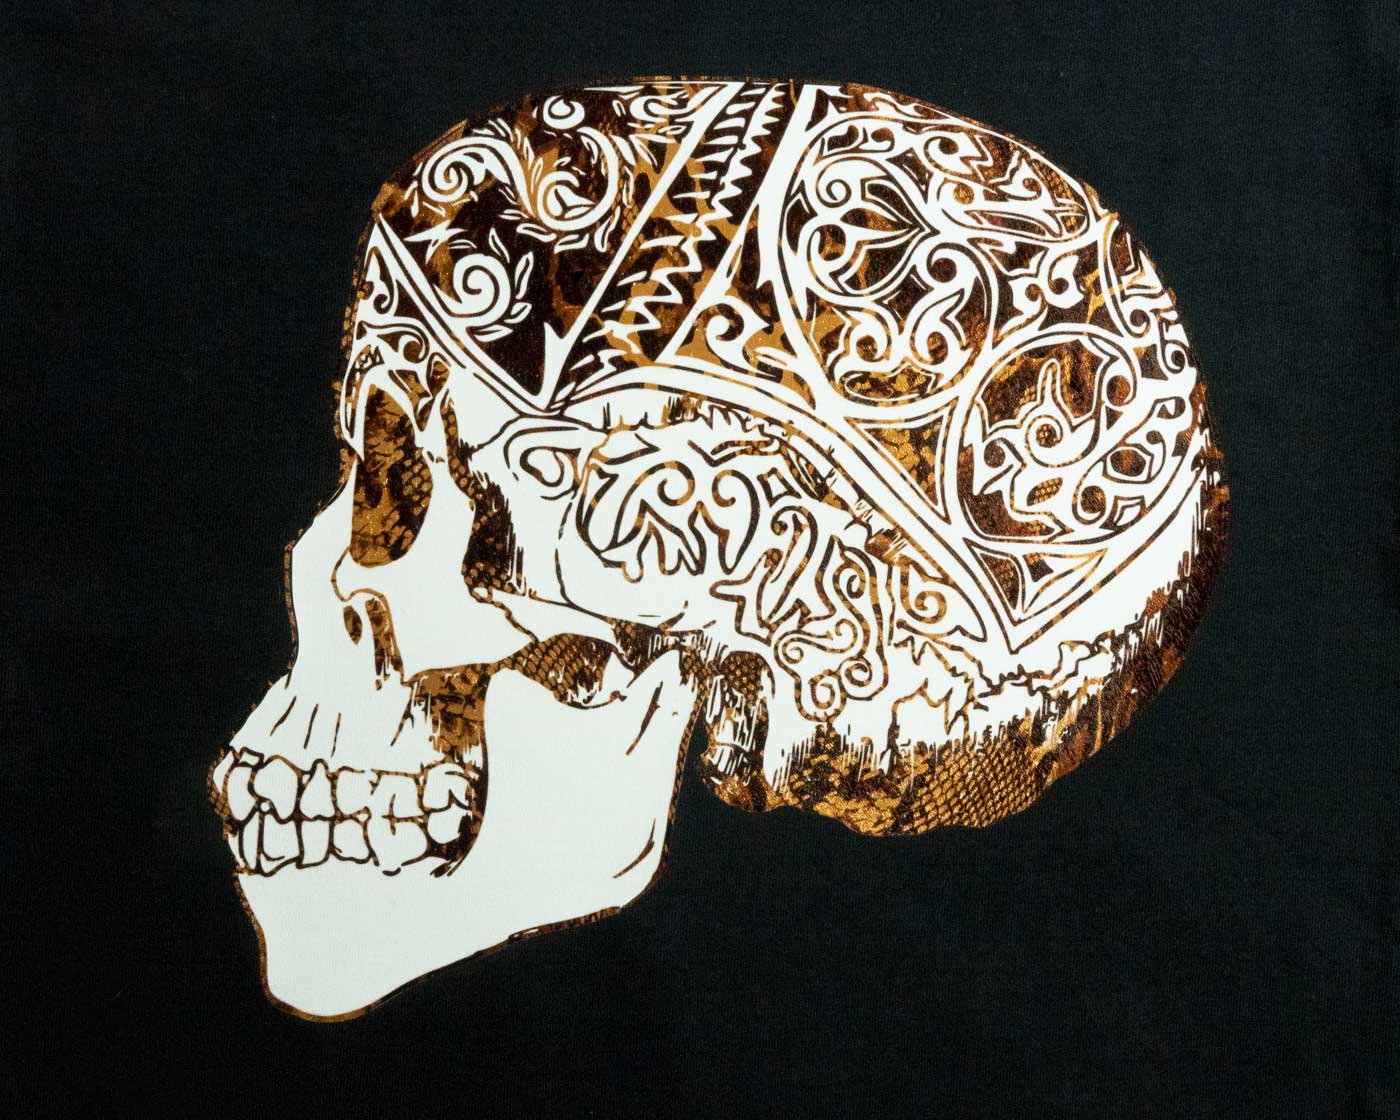 A skull made with ThermoFlex Plus and Snake DecoFilm Soft Metallics